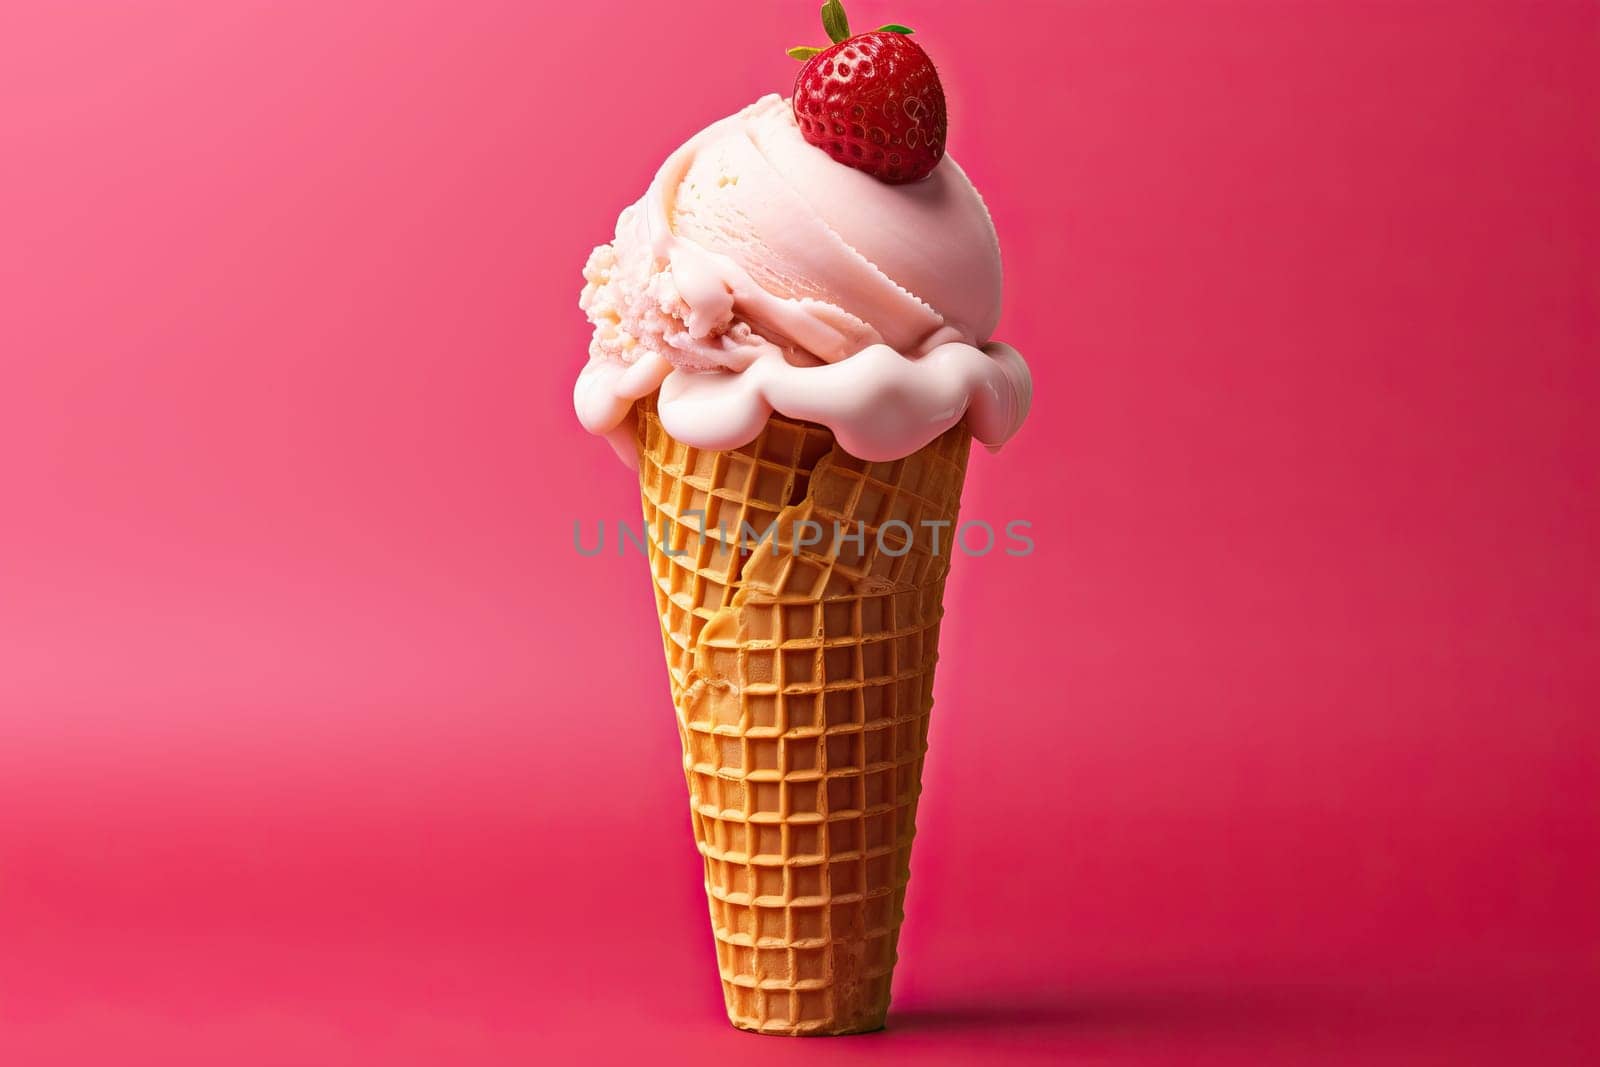 Strawberry ice cream in a waffle cup on a red background. by Niko_Cingaryuk